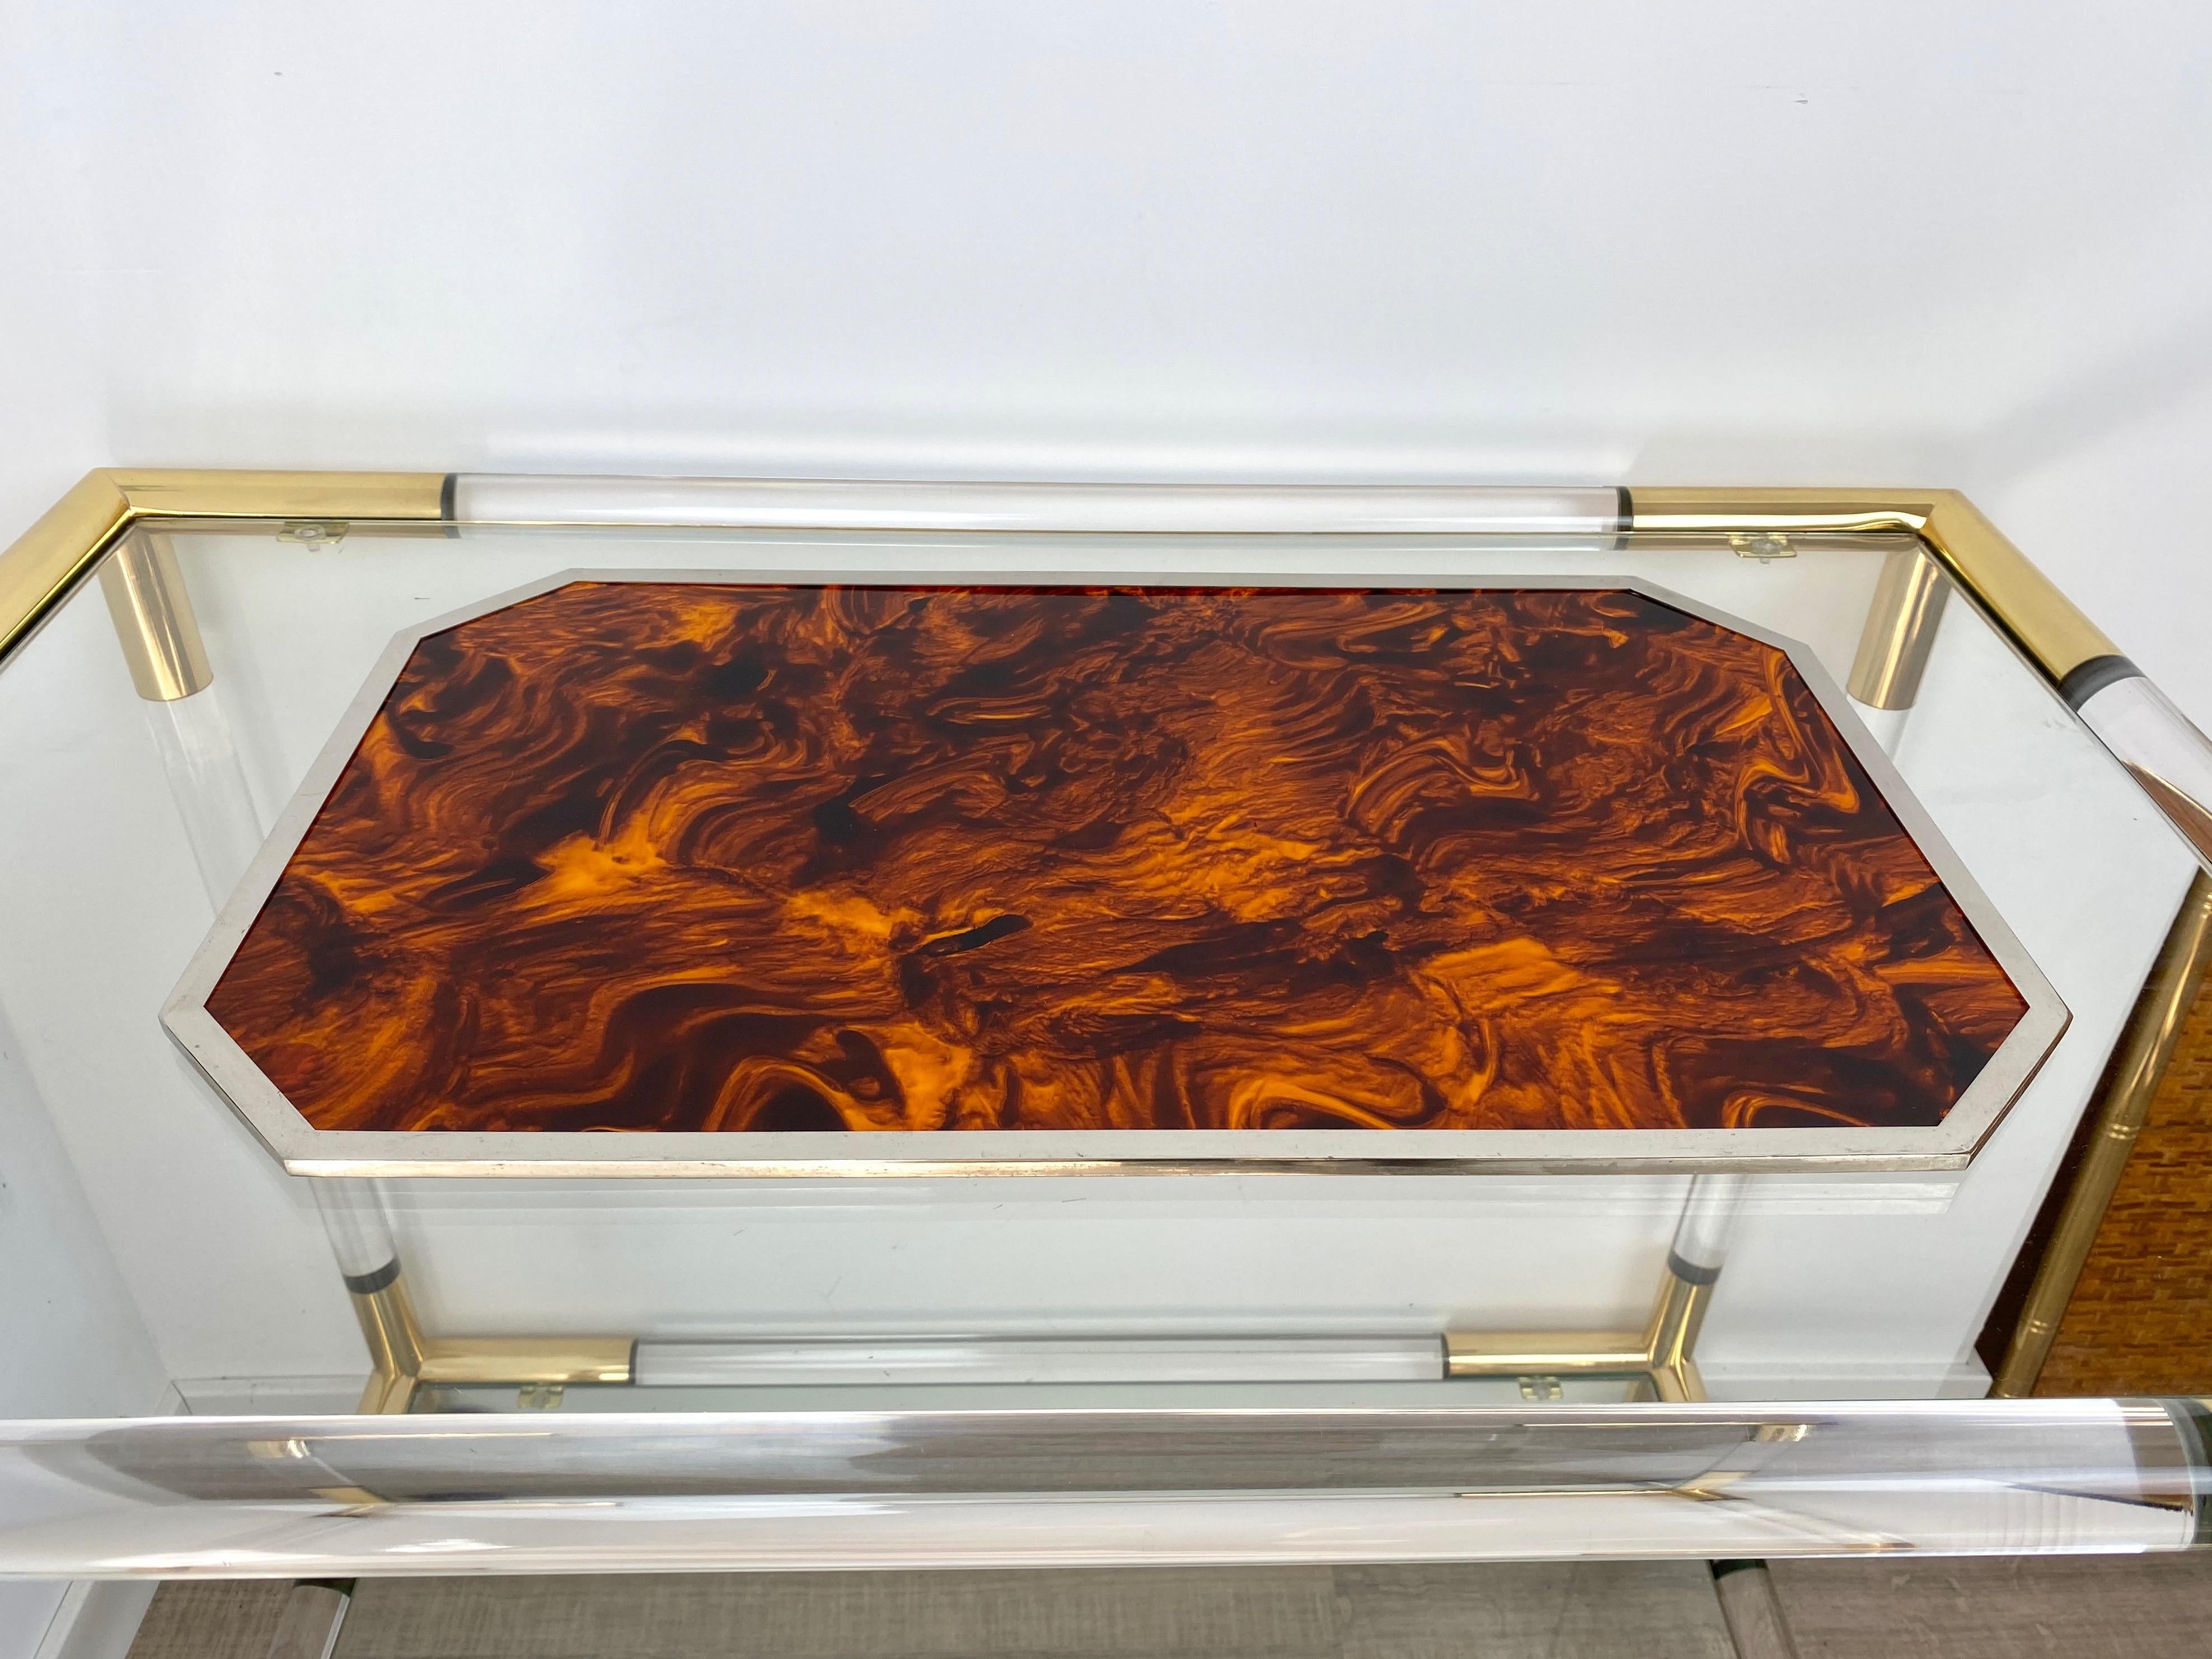 Serving tray in tortoiseshell effect Lucite and squared chrome borders. Italy, Mid-Century Modern piece, circs 1970.